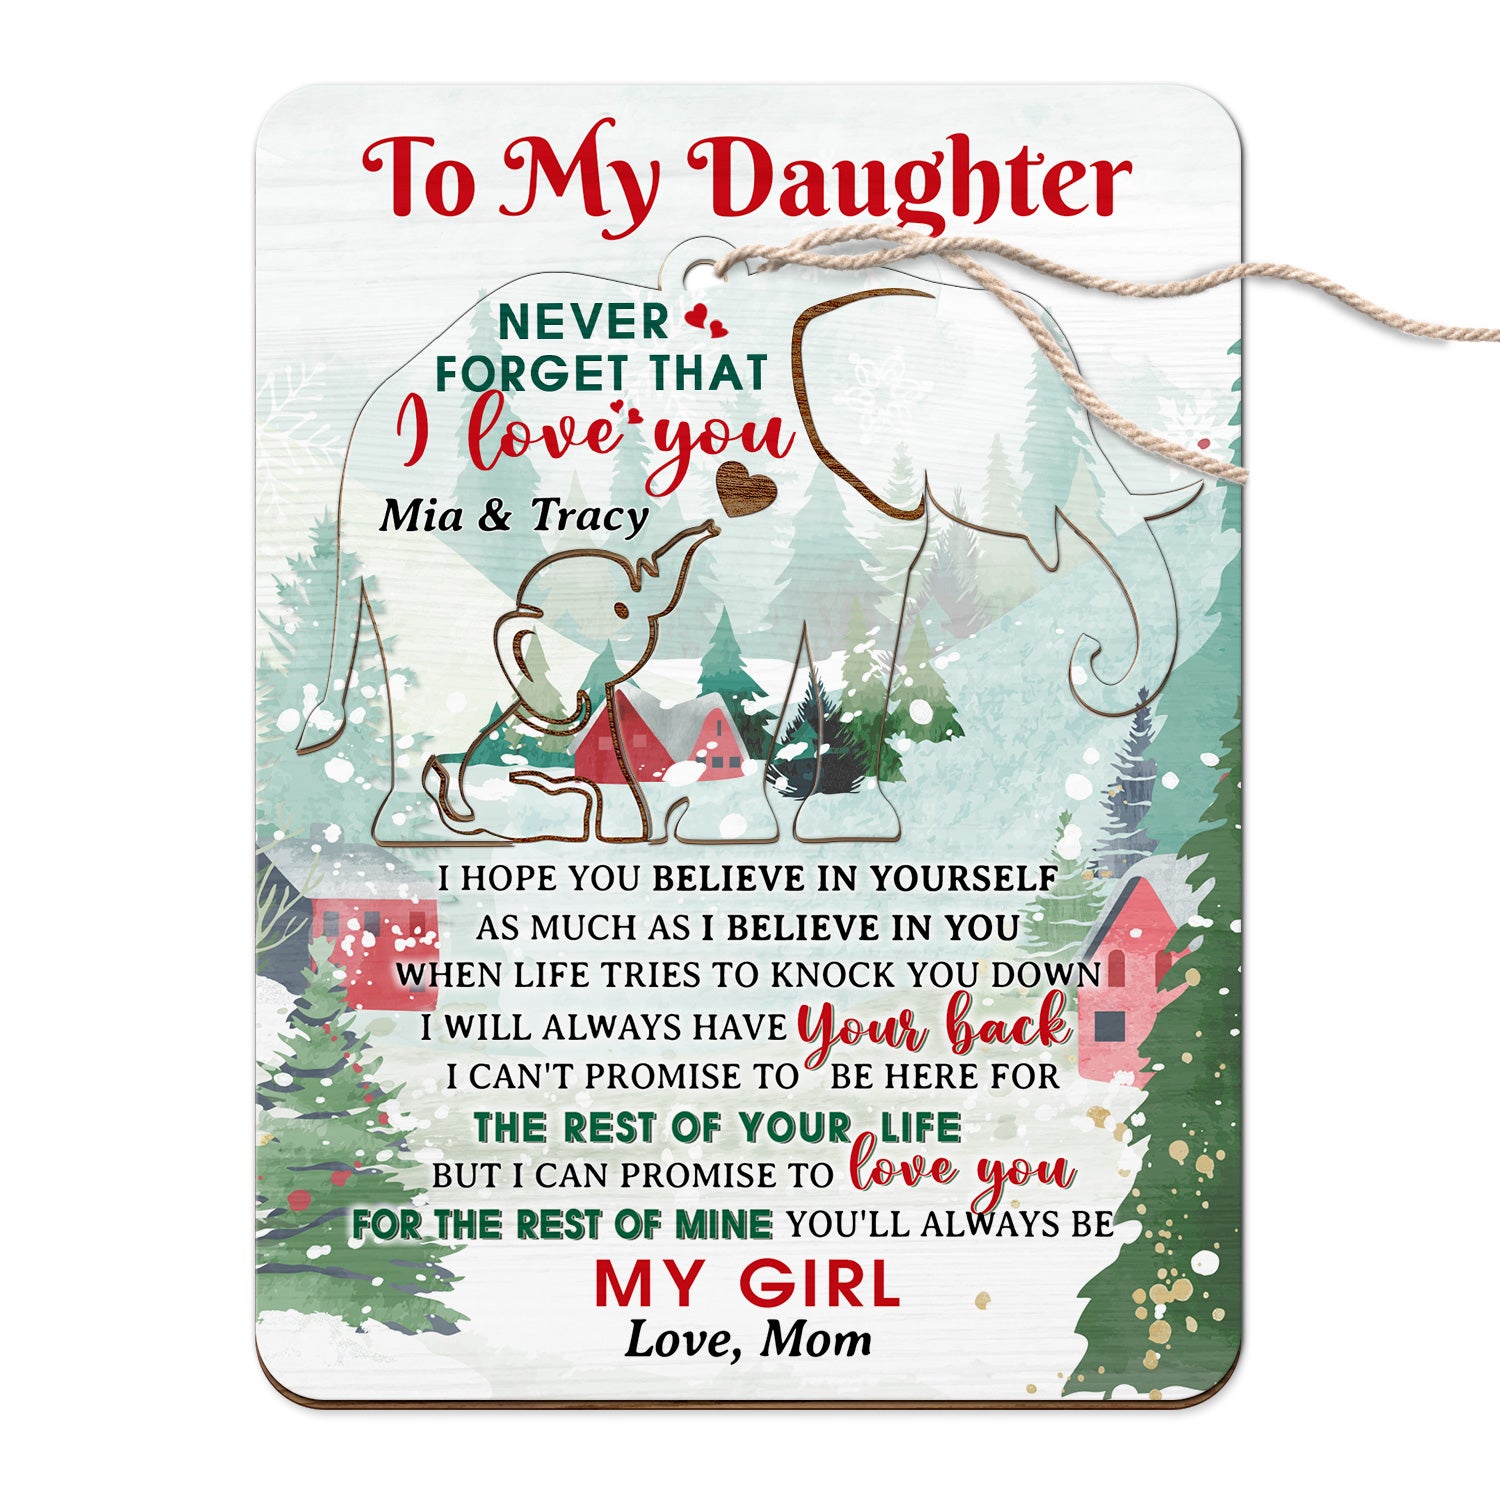 To My Daughter At Christmas - Never Forget that I Love You